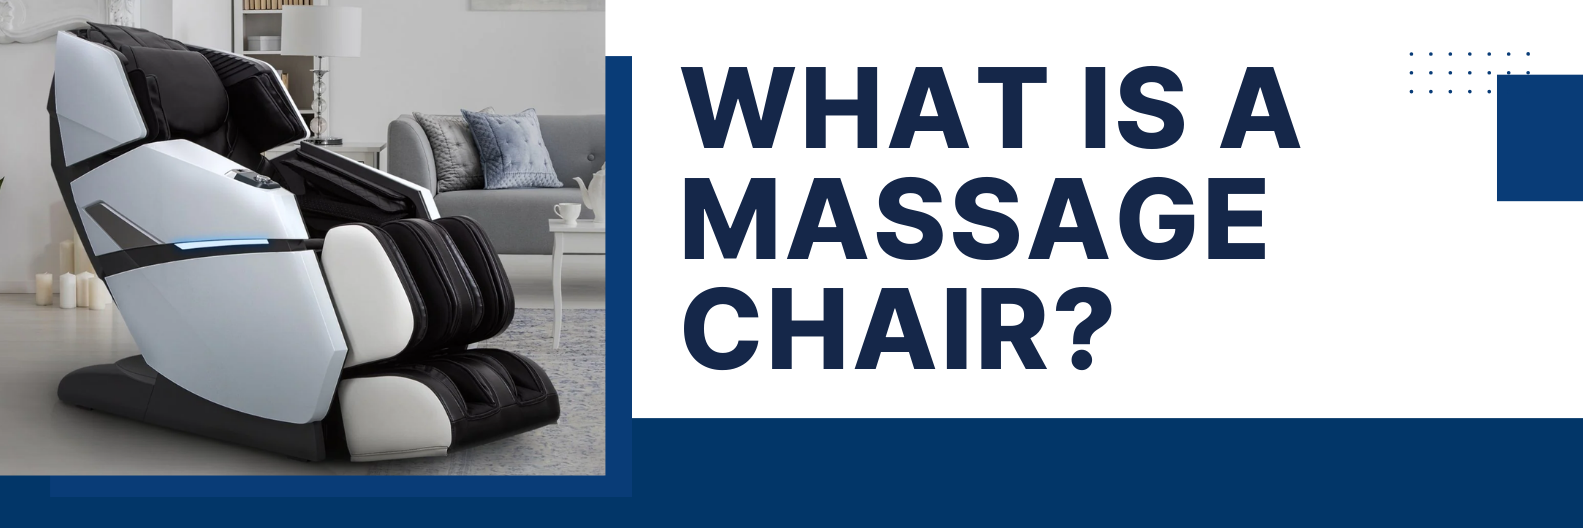 A massage chair is an innovative chair designed to deliver full-body massage with robotics programmed to mimic the hands of a masseuse. 